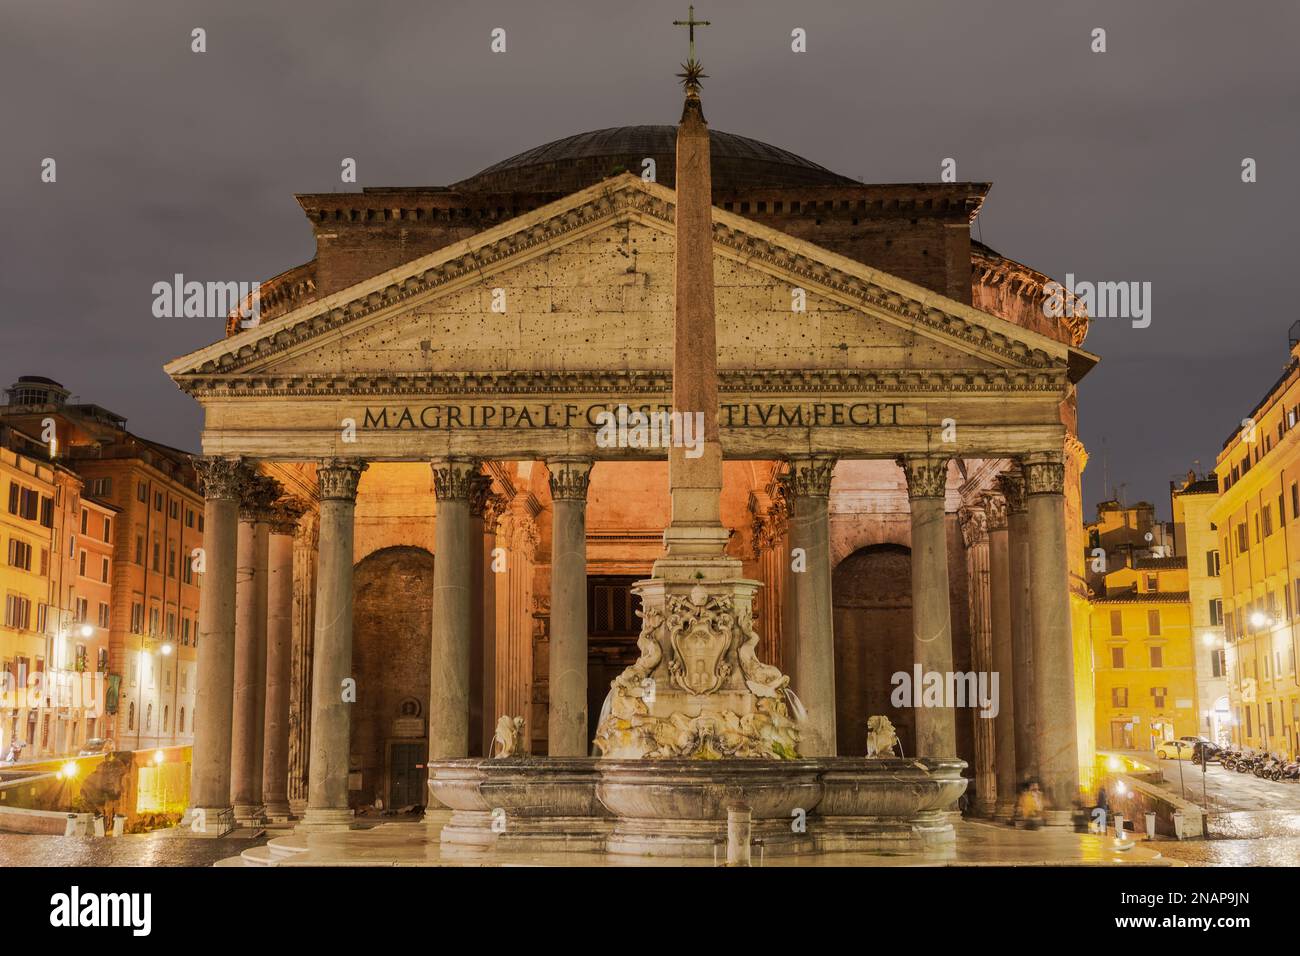 Rome, Italy cylindrical Pantheon monument facade at night. Iconic dome temple at Rotonda square with fountain, obelisk & surrounding buildings visible. Stock Photo